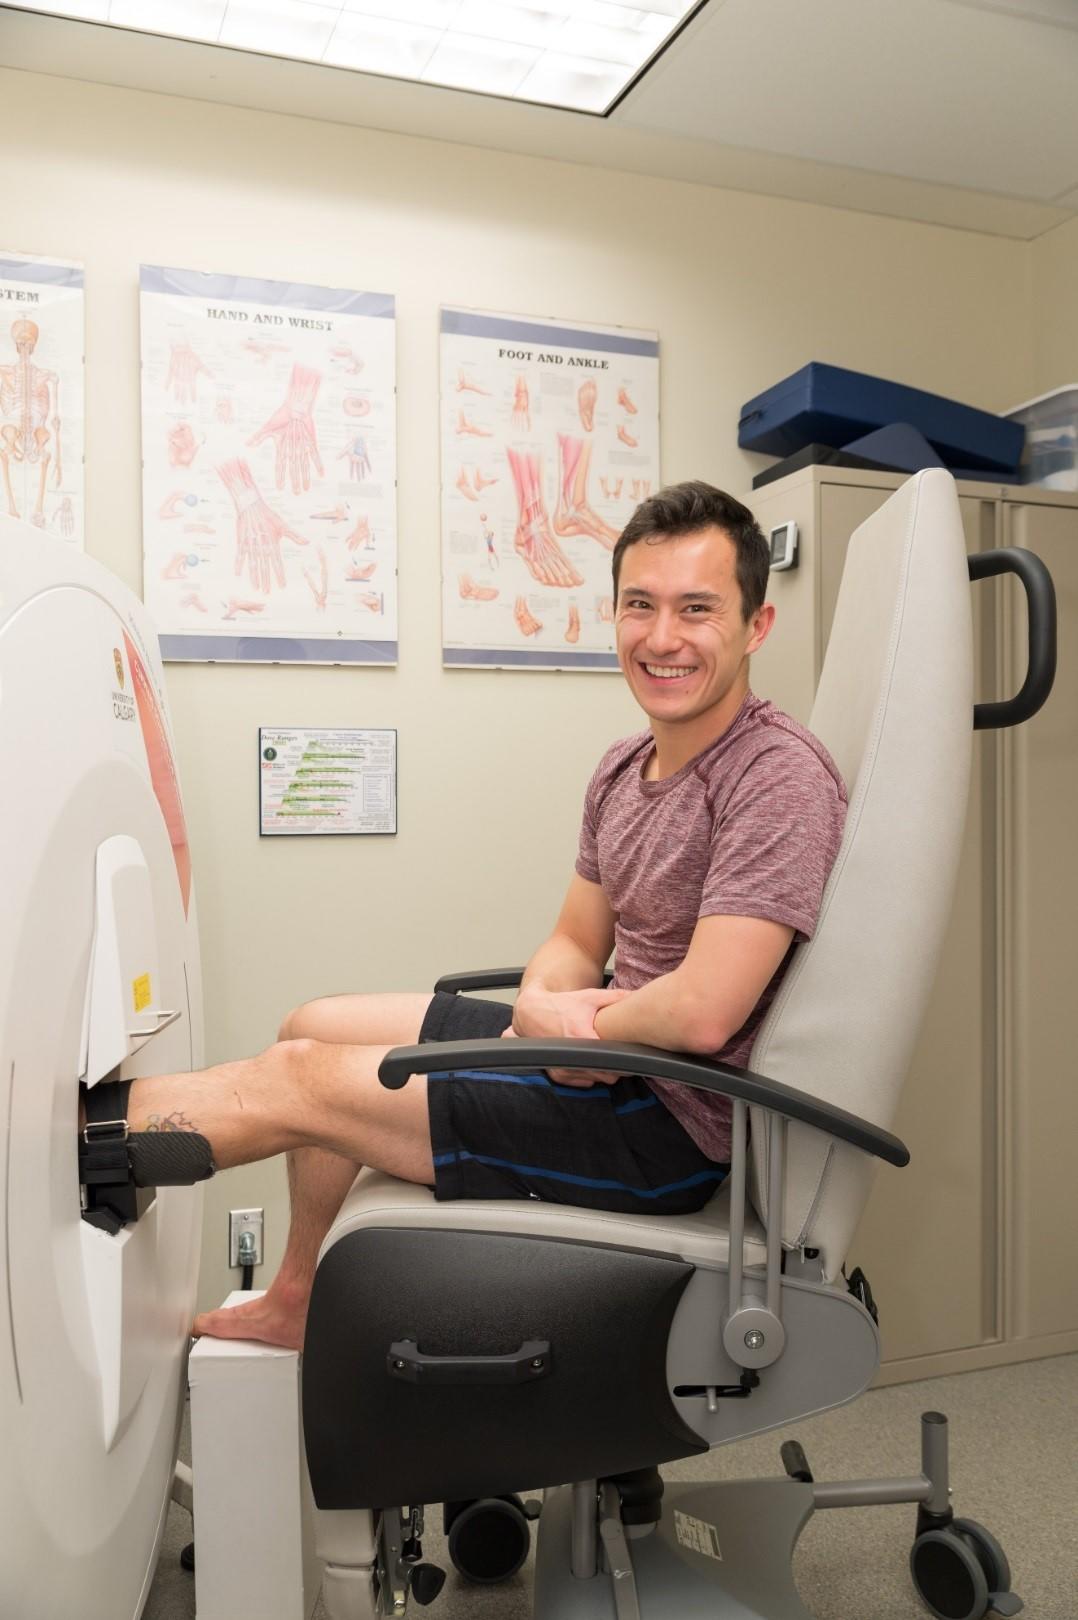 Three-time world champion and Olympic medallist figure skater Patrick Chan in the XtremeCT scanner as part of a study in the Centre for Mobility and Joint Health looking at bone health in figure skaters.  Both loading and non-loading legs are scanned to look at differences in bone microarchitecture.